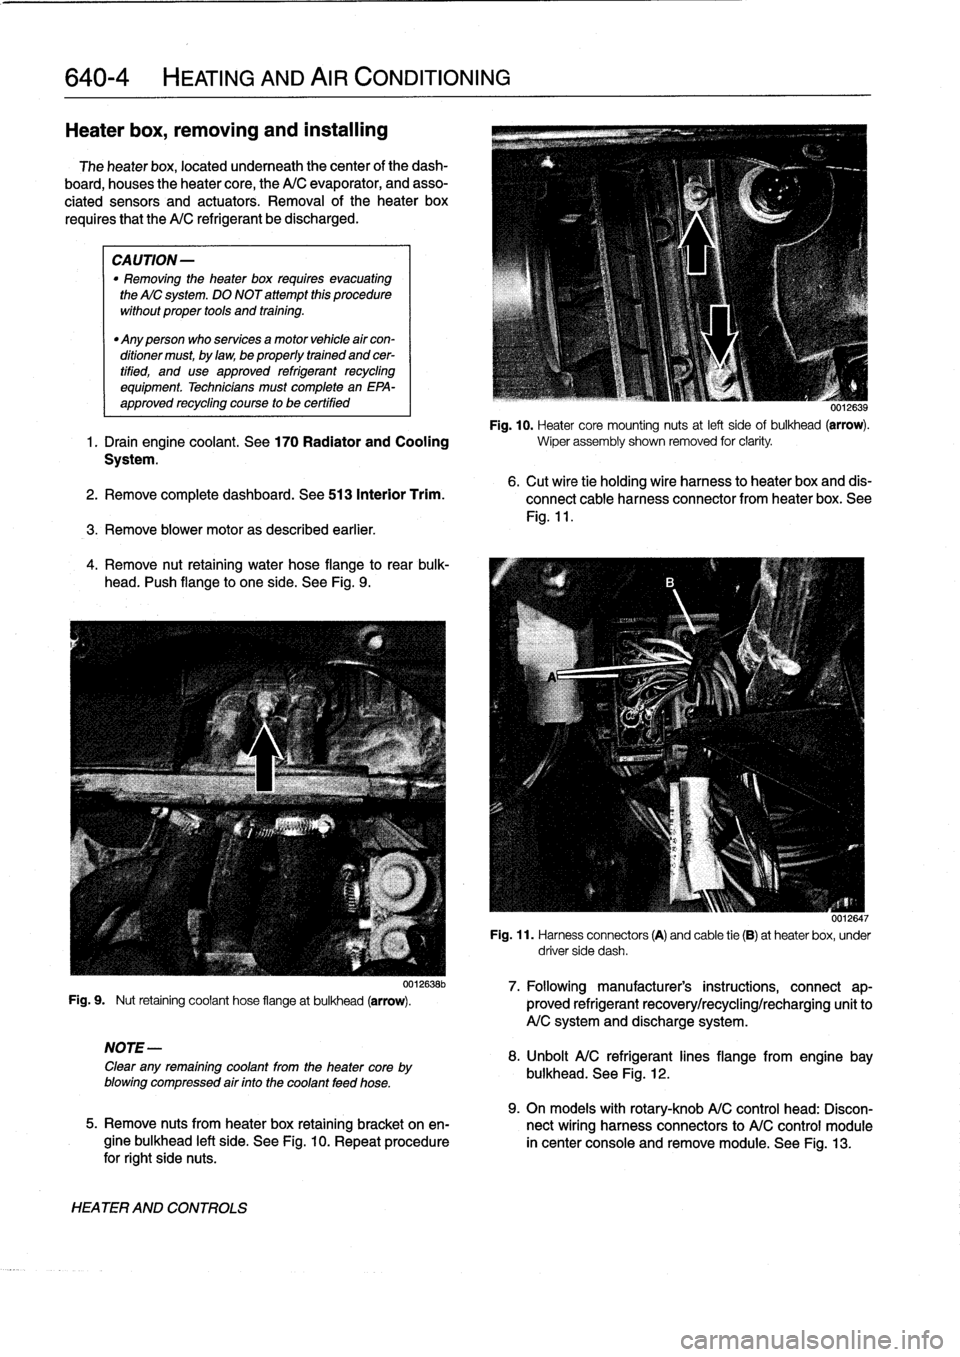 BMW 318i 1998 E36 Service Manual 
640-4

	

HEATING
AND
AIR
CONDITIONING

Heater
box,
removing
and
installing

The
heater
box,
located
underneath
thecenter
of
the
dash-

board,
houses
theheater
core,
the
A/C
evaporator,
and
asso-

ci